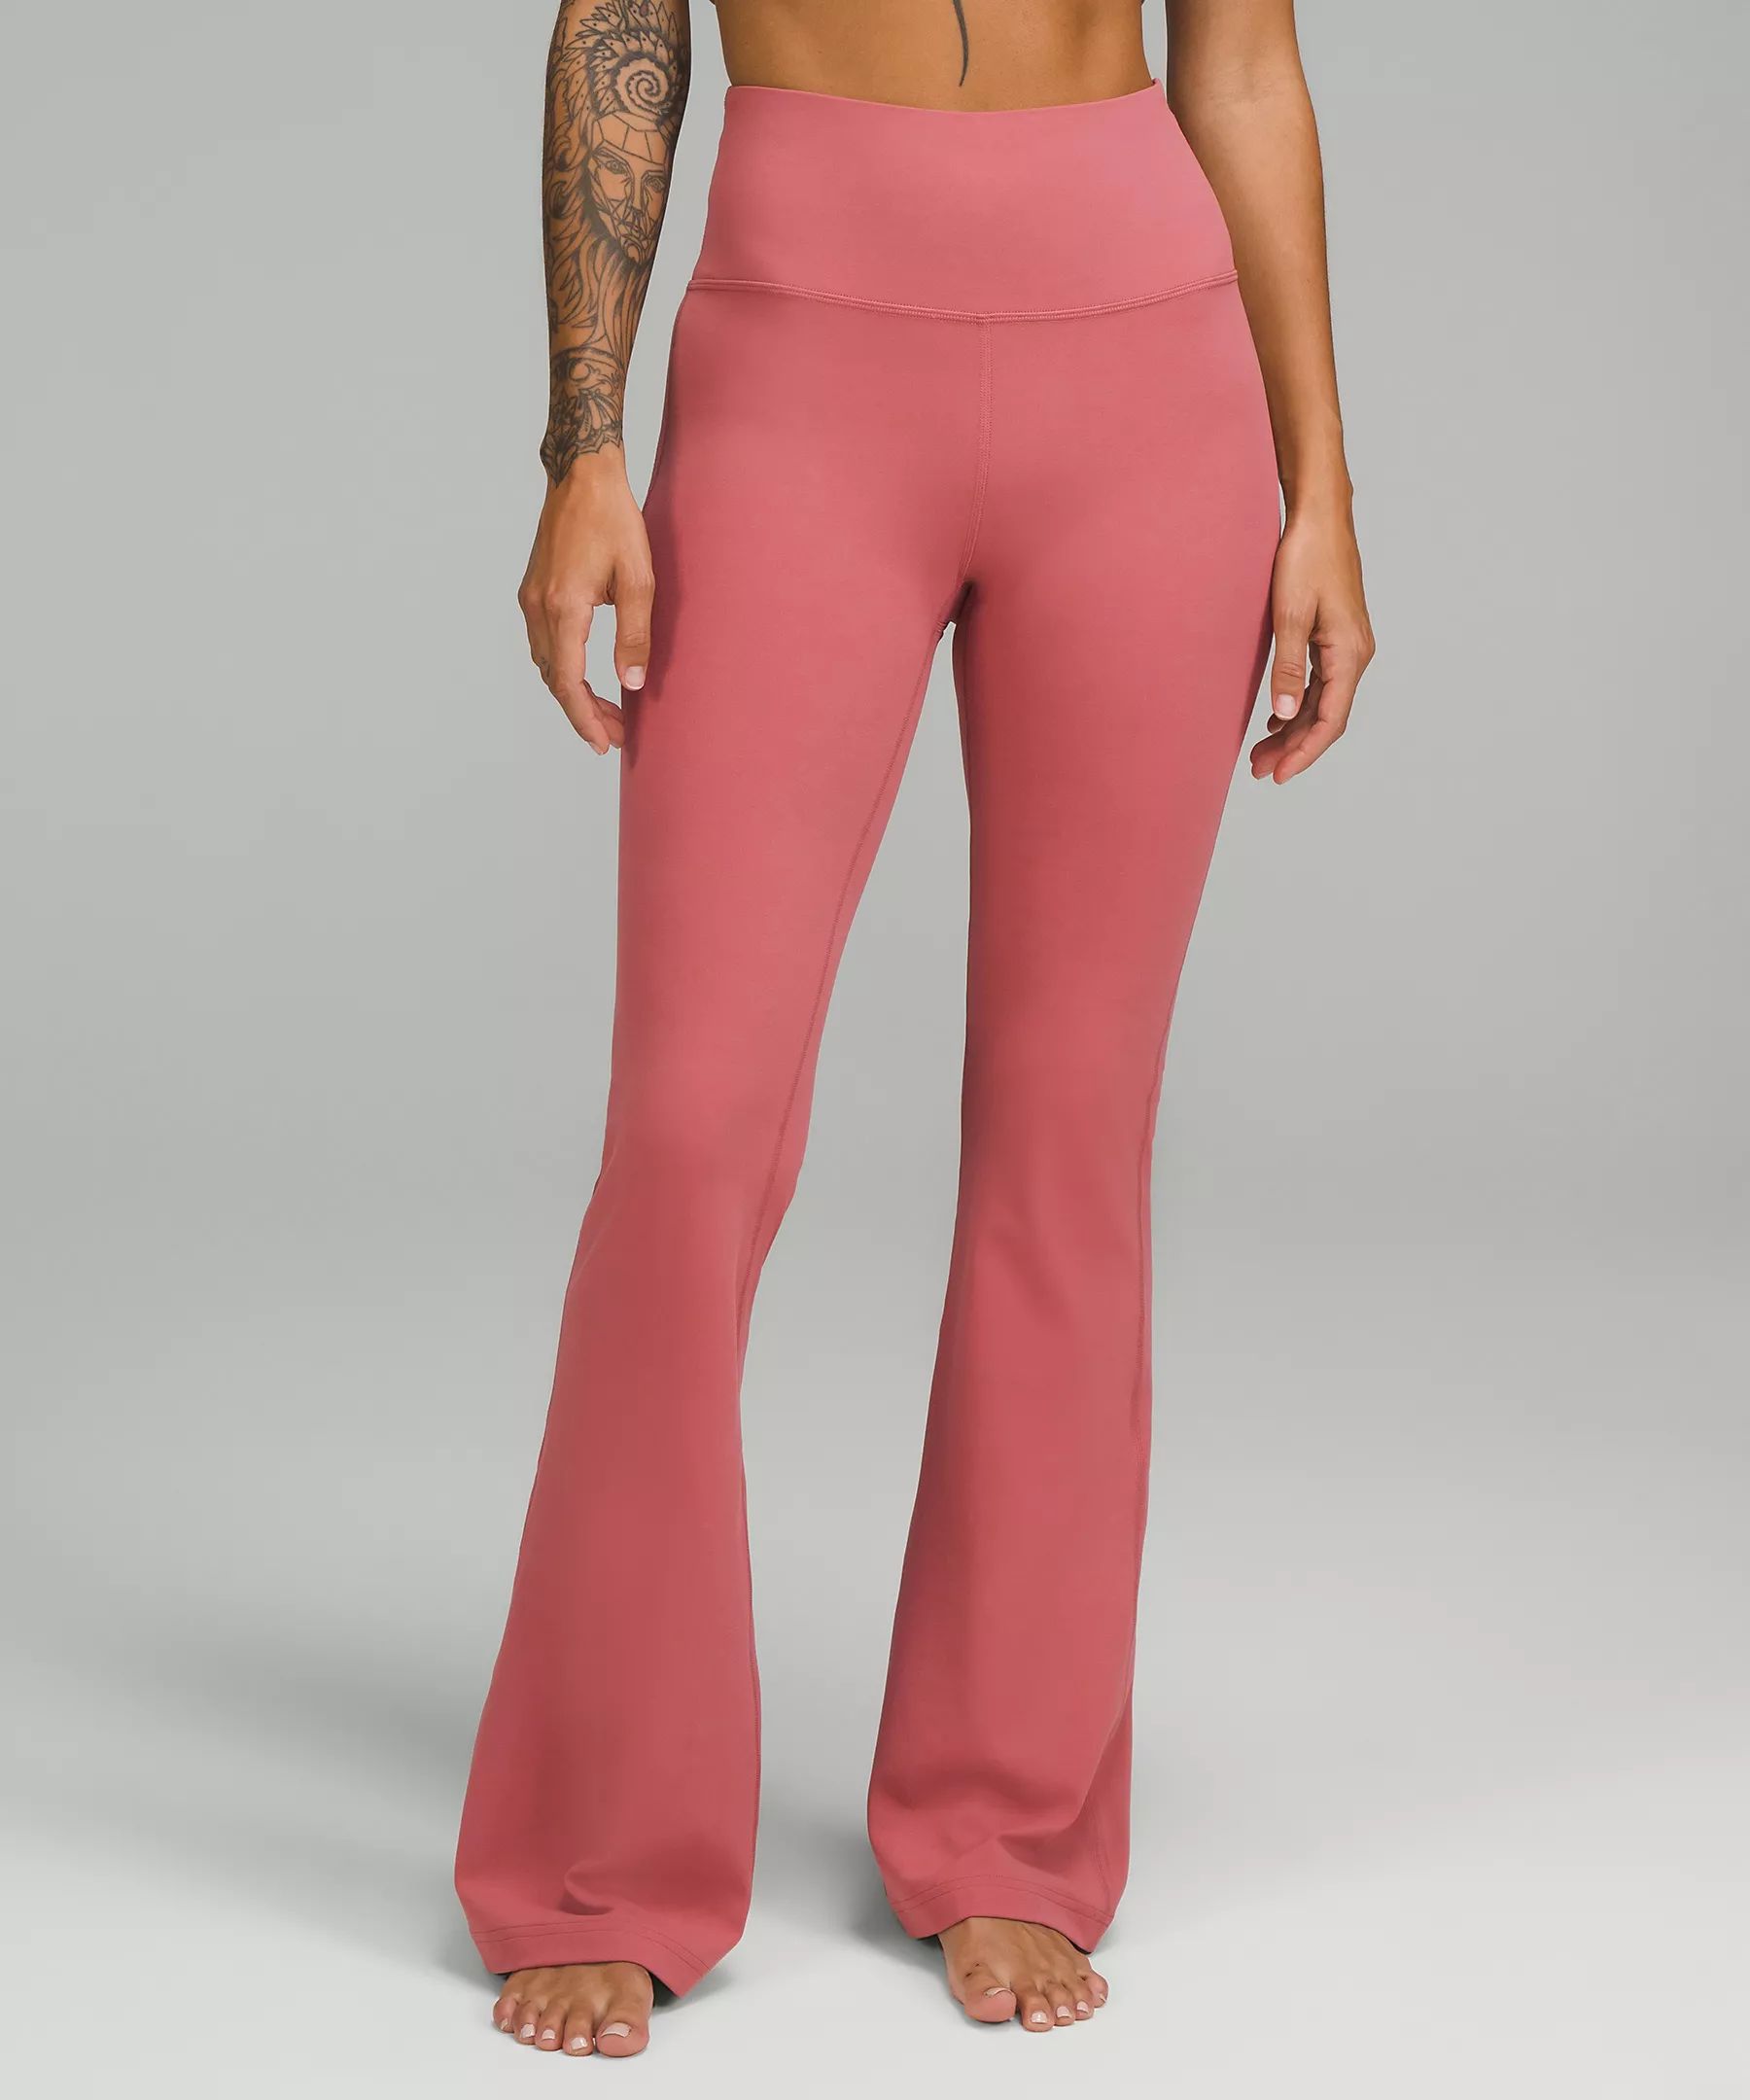 Groove Super-High-Rise Flared Pant Nulu Online Only | Lululemon (US)